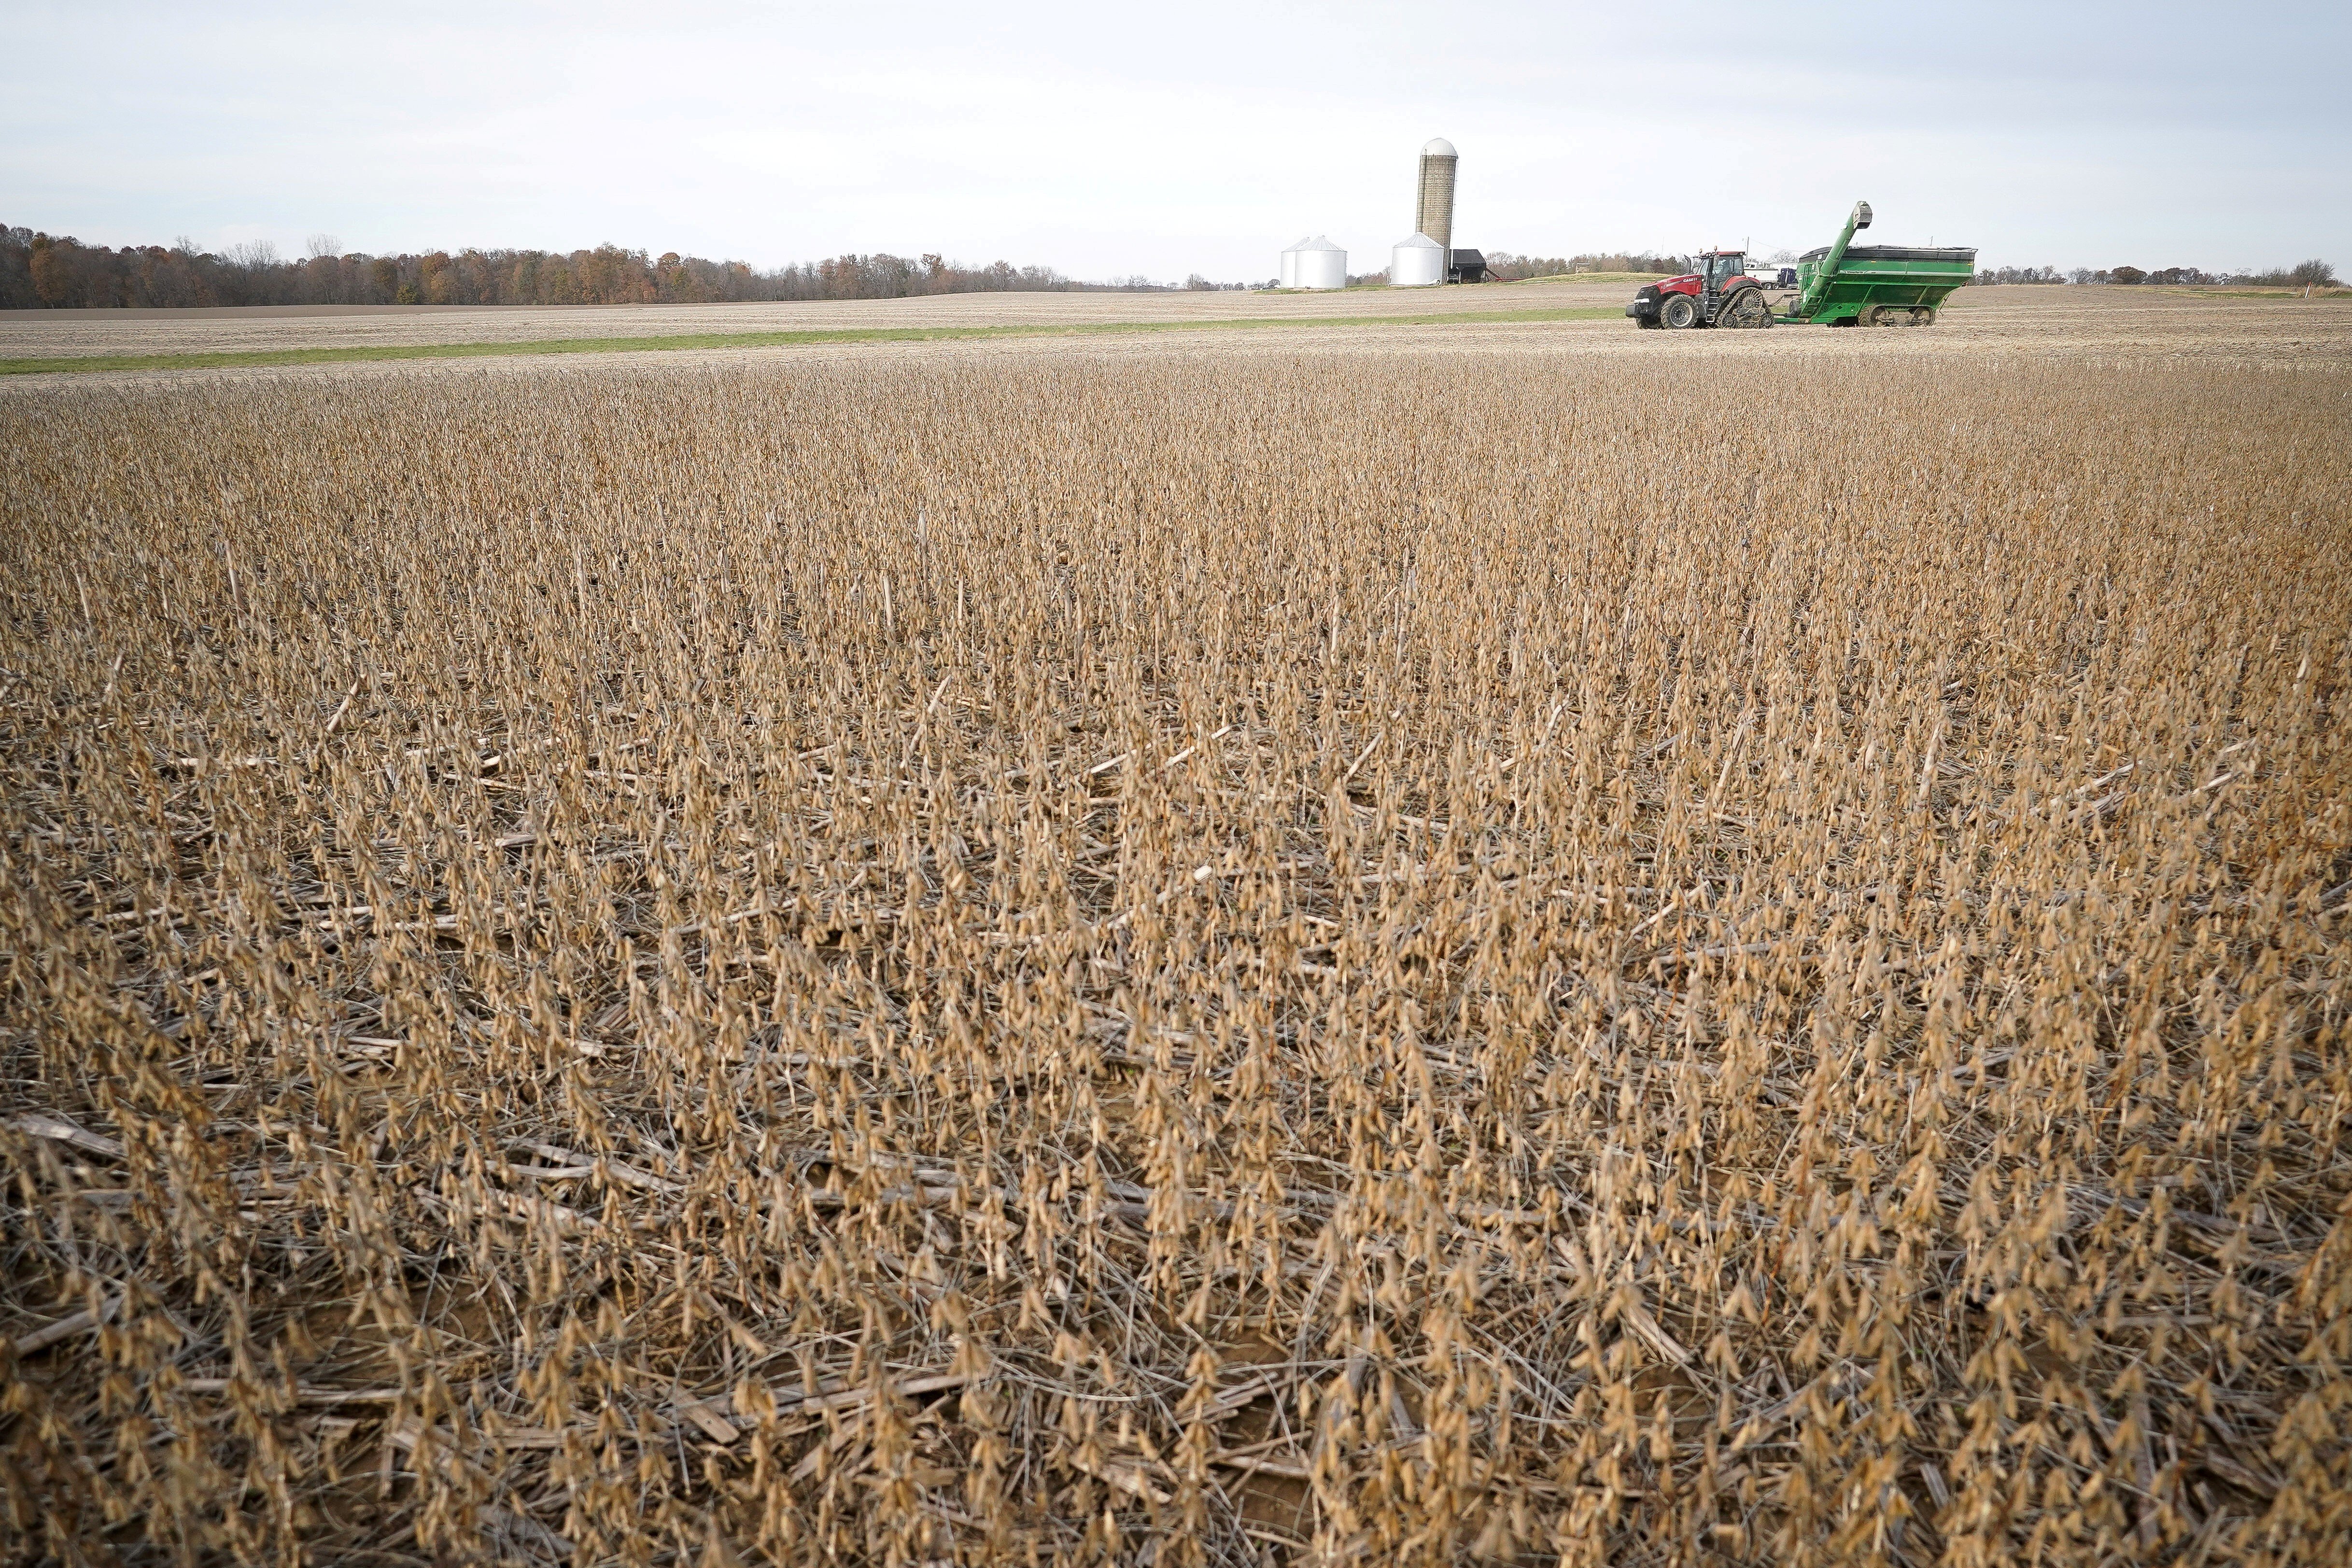 Soybeans are harvested from a field in Roachdale, Indiana, in November 8, 2019. Countries that dominate trade in key resources, such as iron ore, oil and soybeans, could stand to benefit handsomely in a world turning away from globalisation. Photo: Reuters